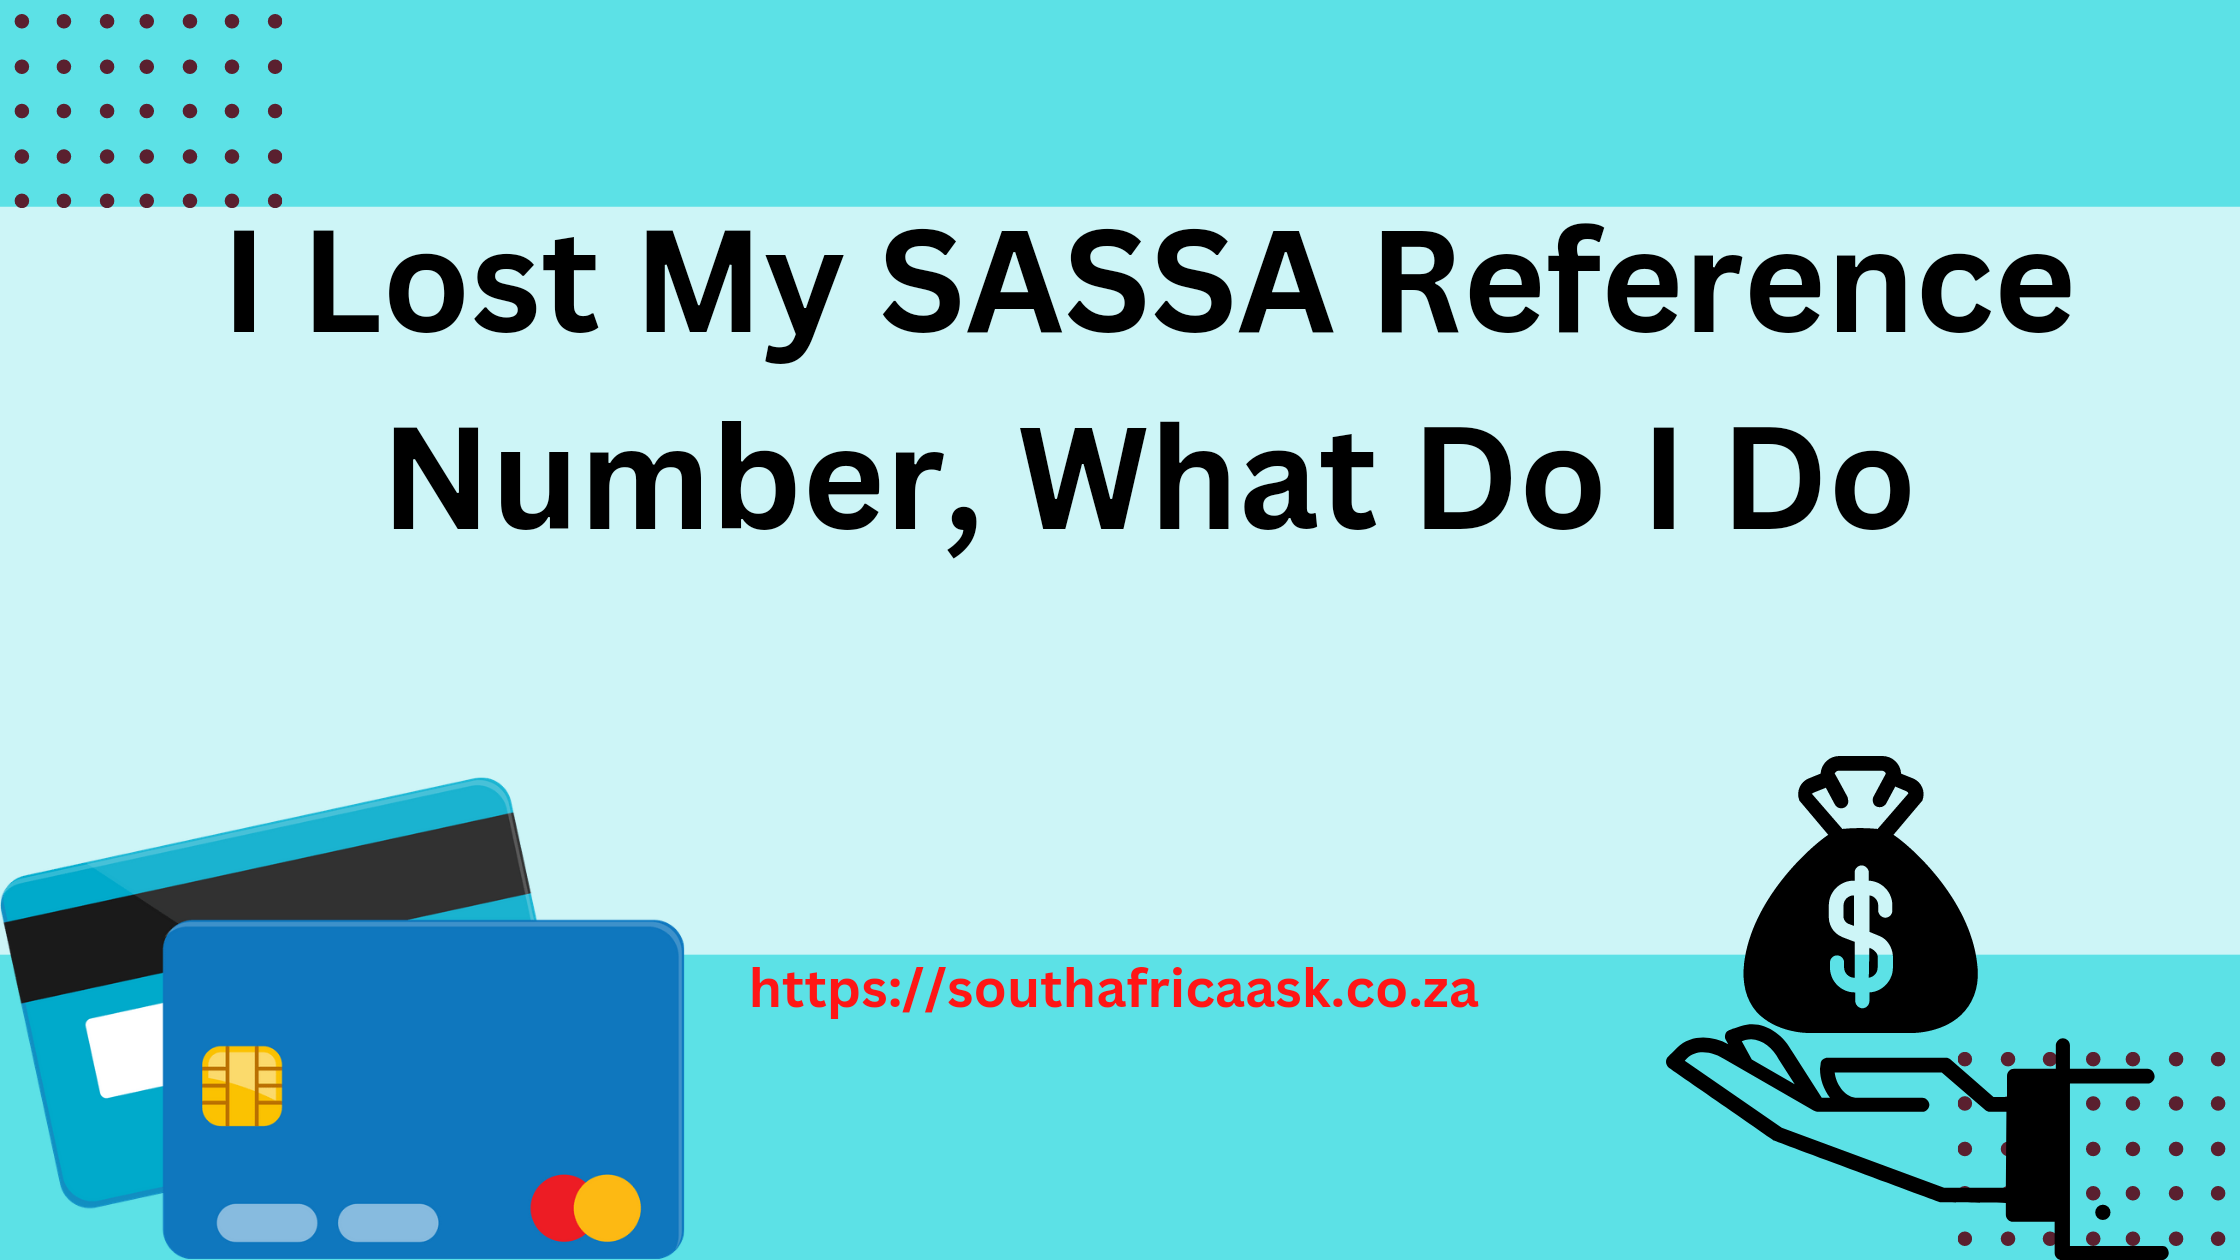 I Lost My SASSA Reference Number, What Do I Do